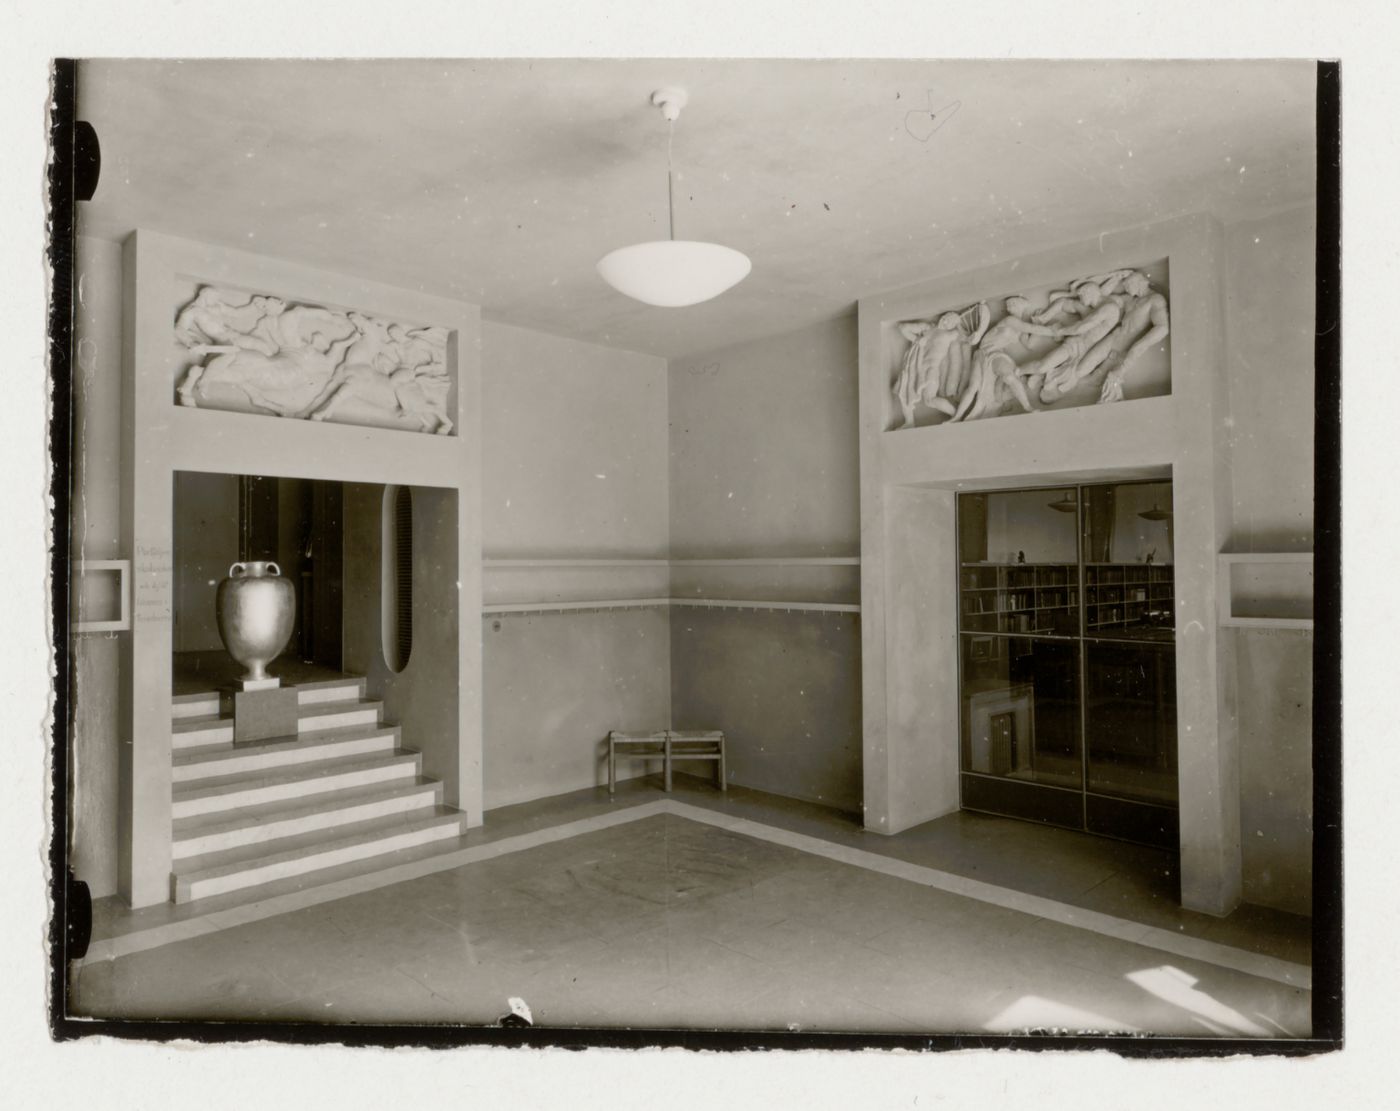 Interior view of a vestibule of Stockholm Public Library showing bas-reliefs, 51-55 Odengatan, Stockholm